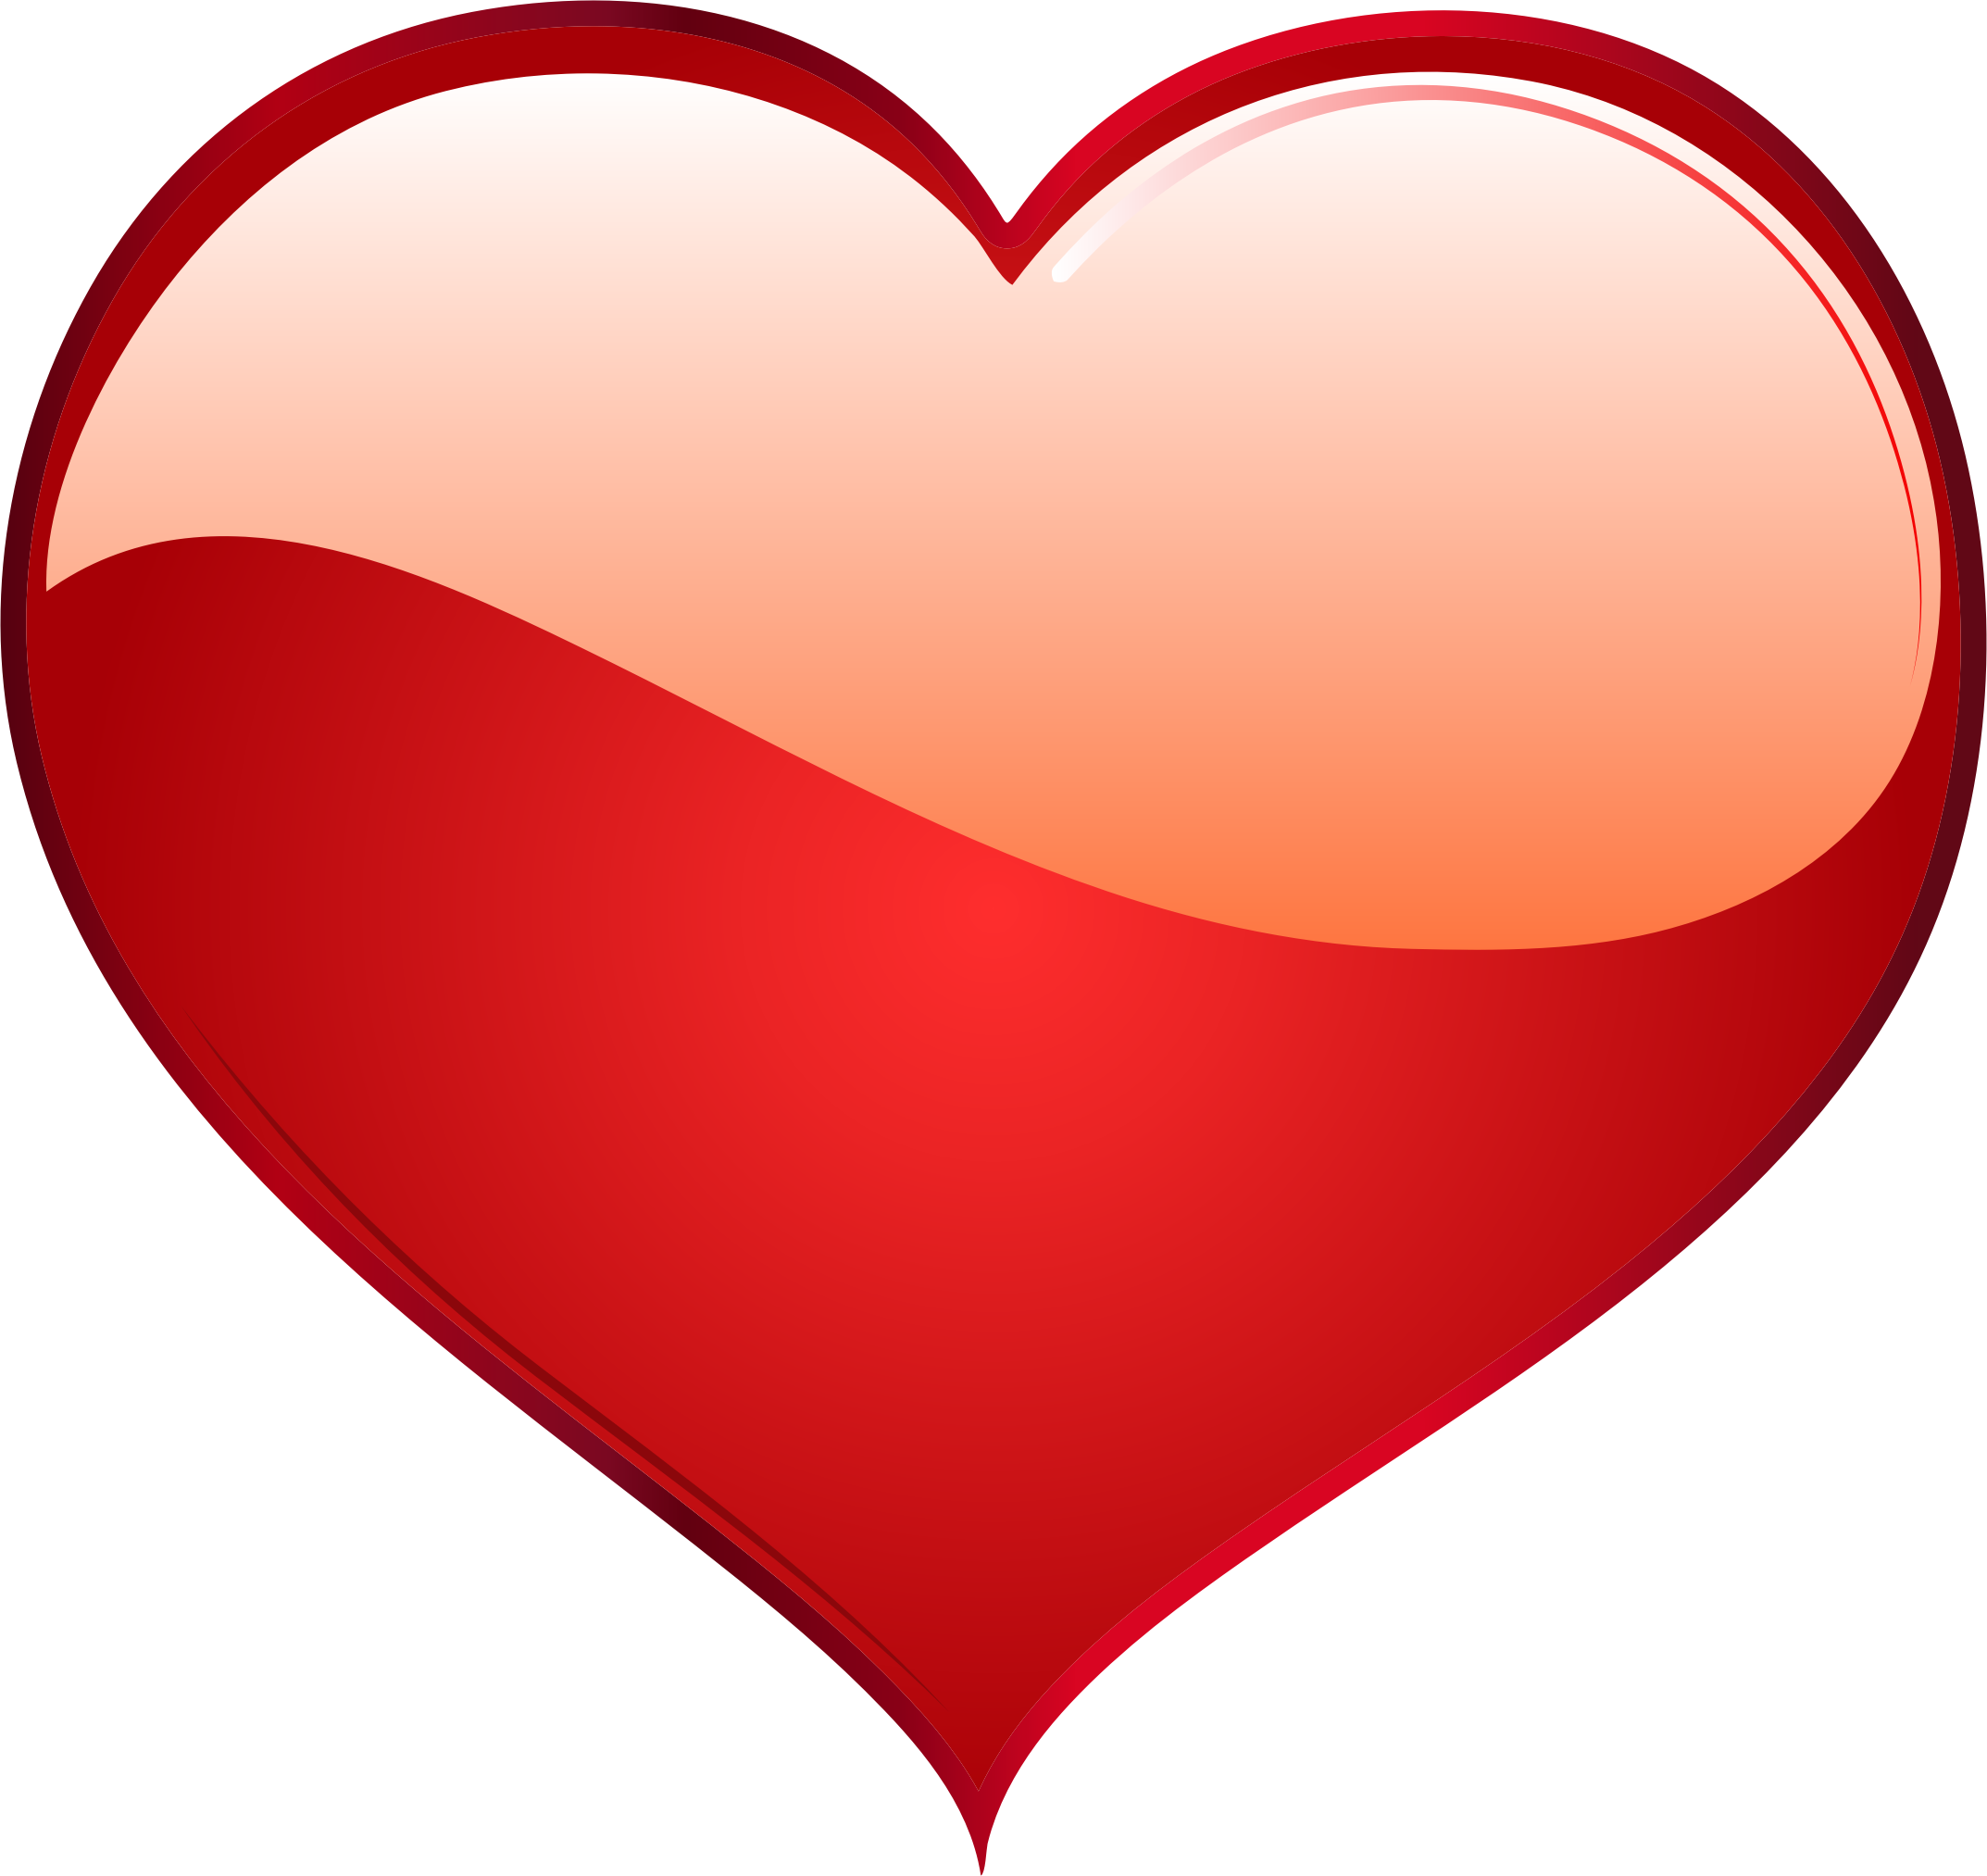 Download Red Heart Transparent HQ PNG Image